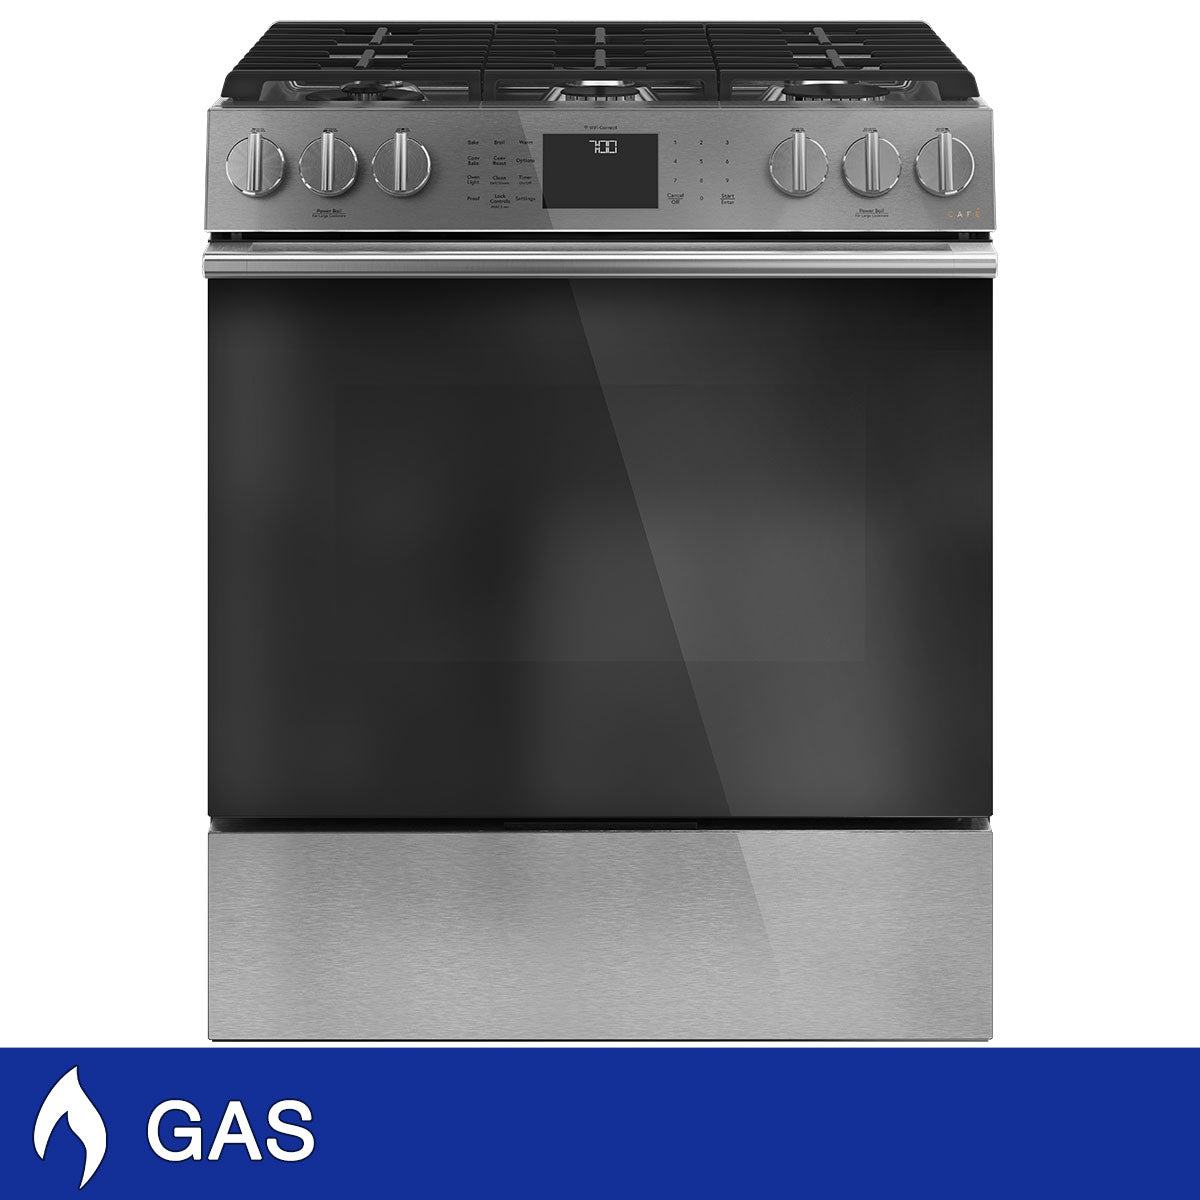 Café 5.6 cu. ft. Smart Slide-In GAS Range with Convection Oven and WiFi Connect Image